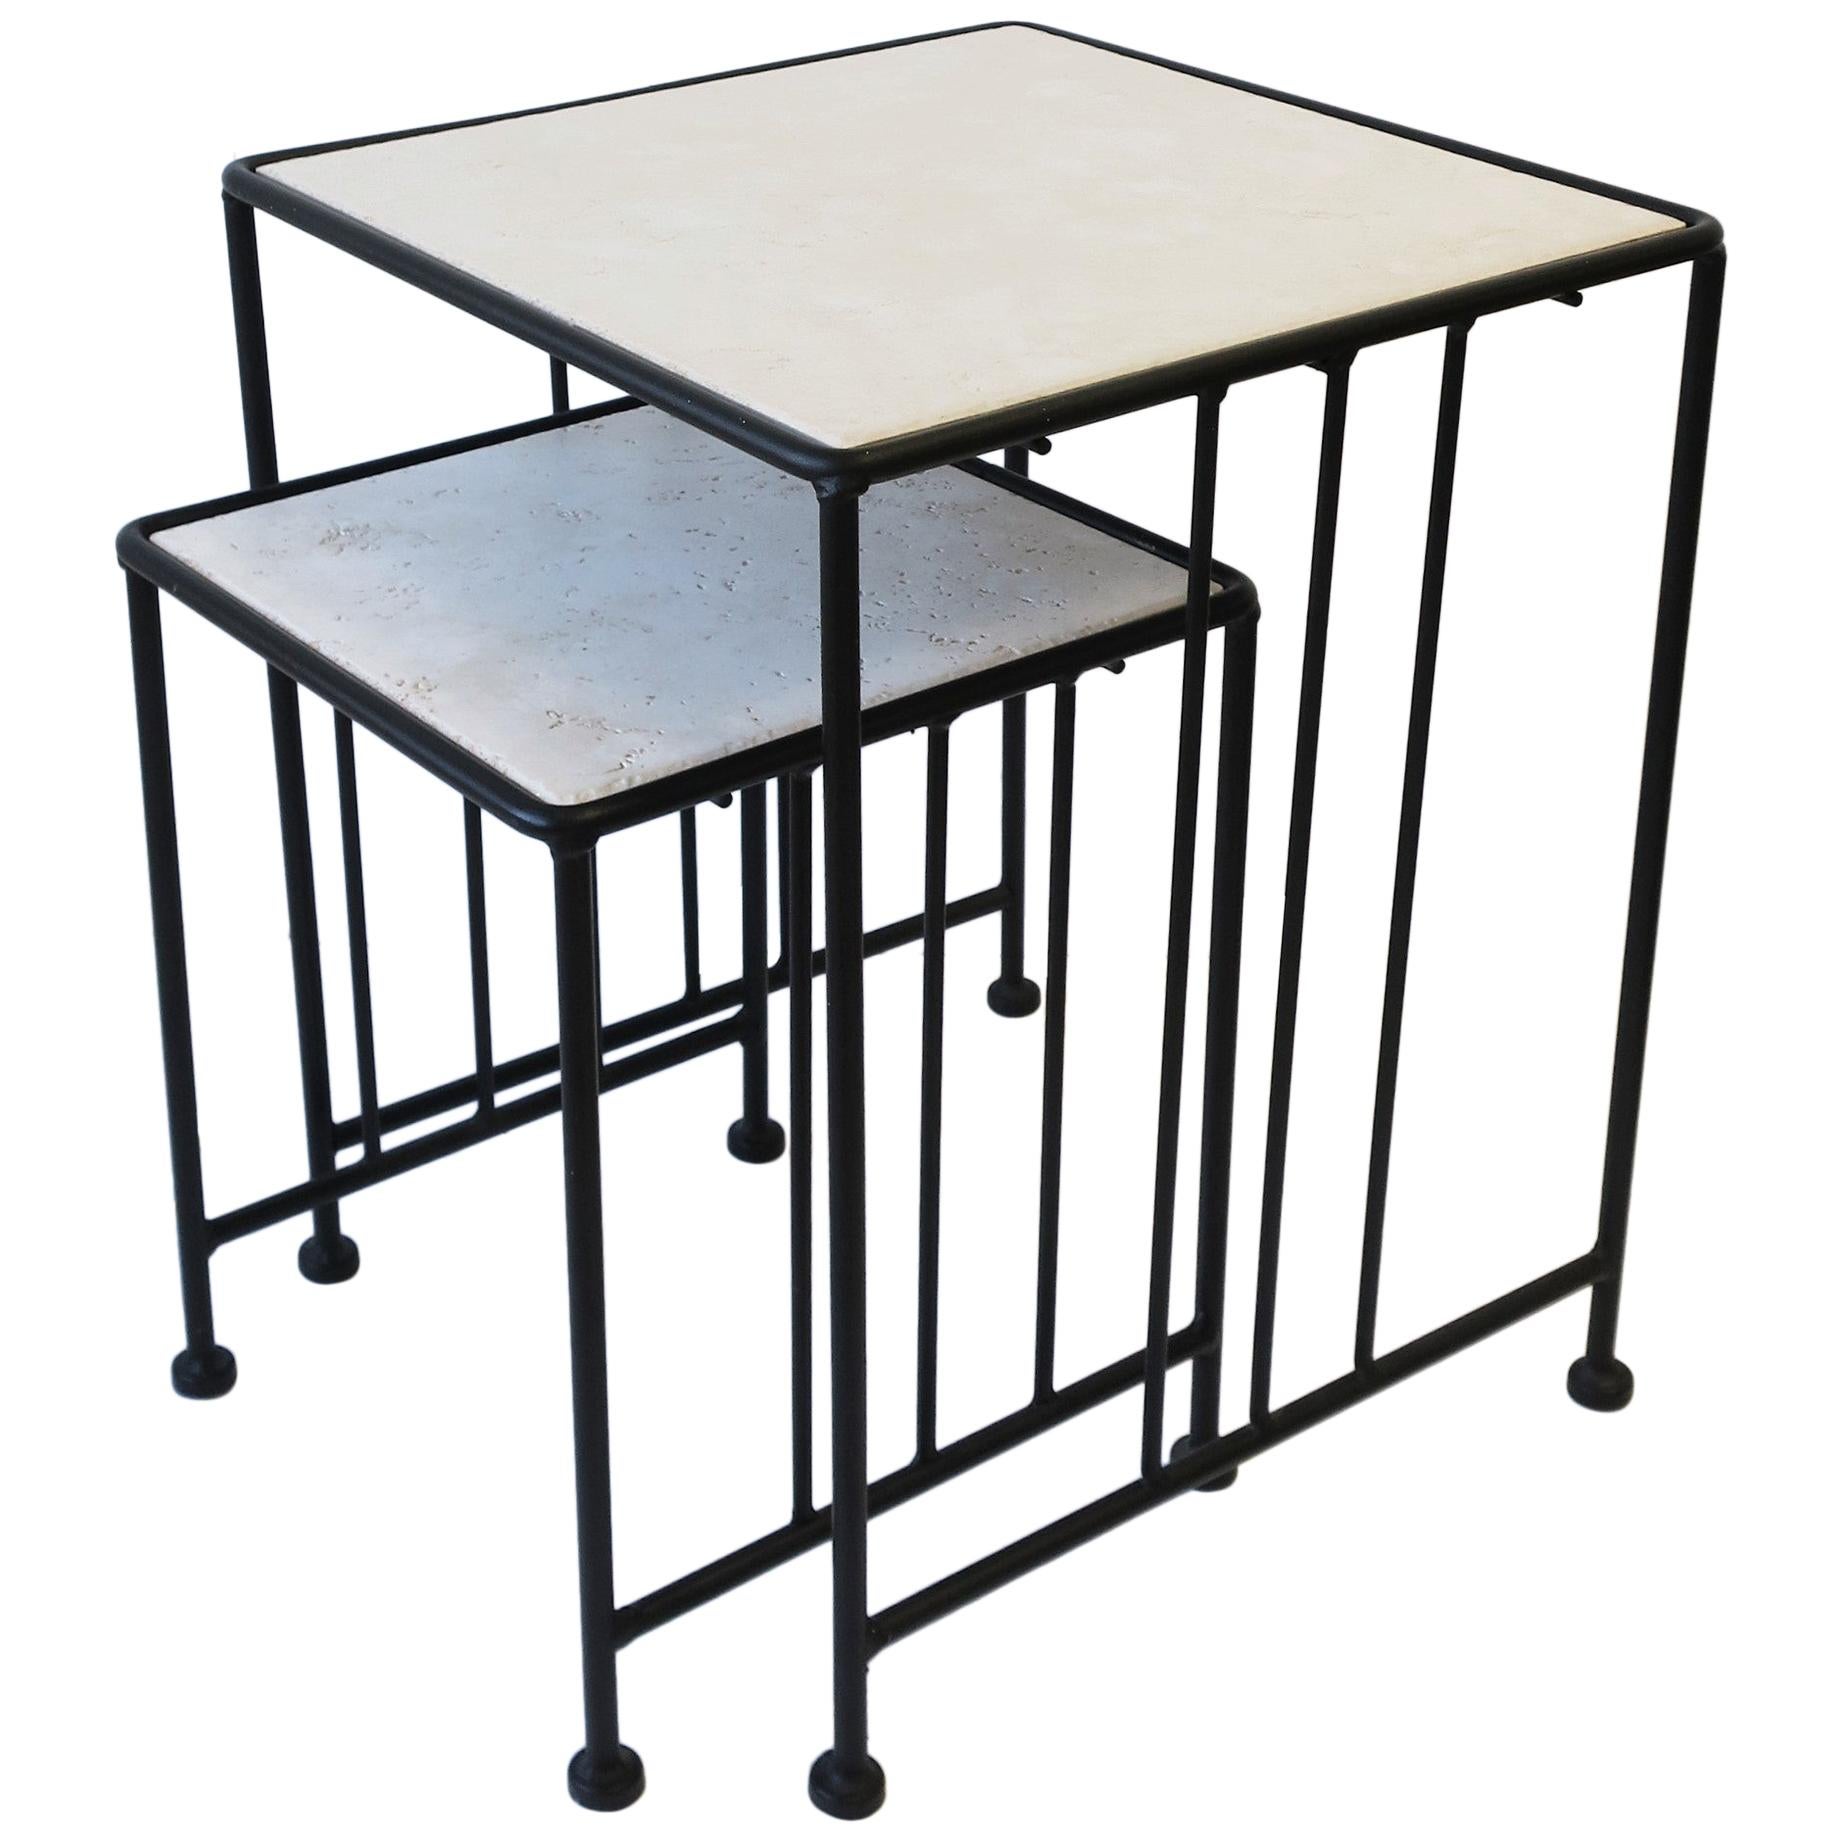 Italian Black End or Nesting Tables in the Art Deco Bauhaus Style For Sale